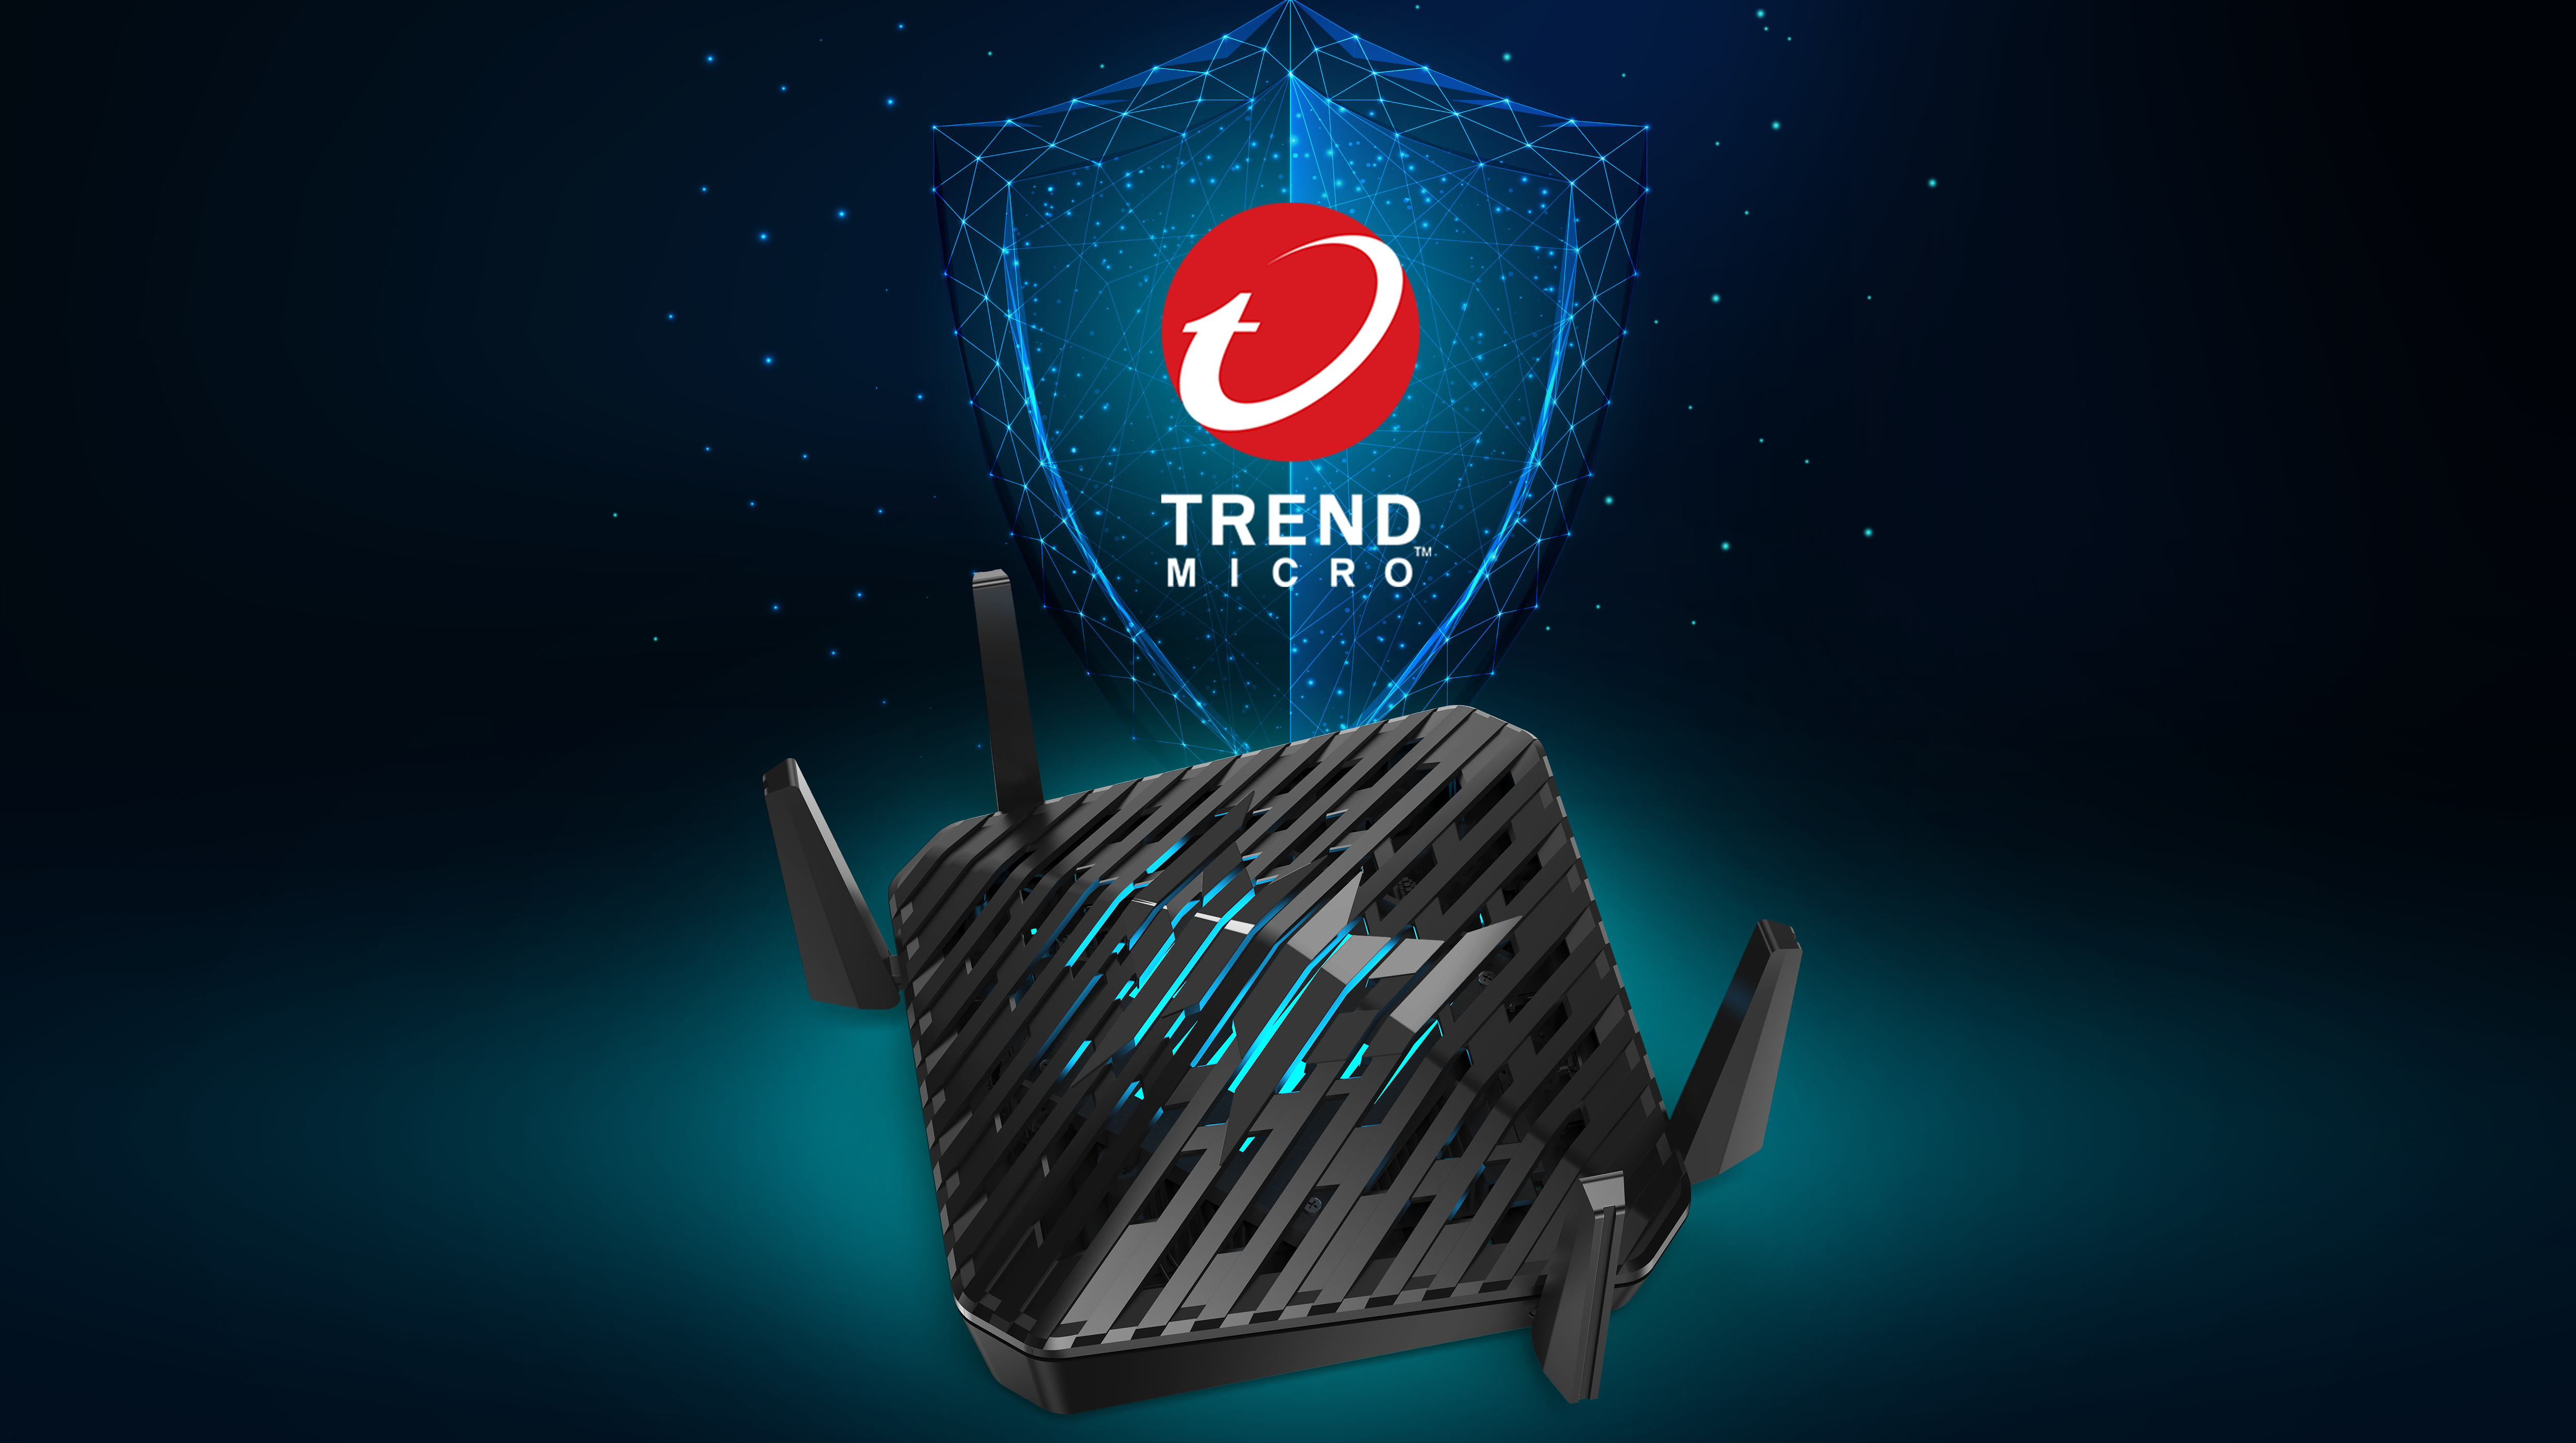 KSP04_SHIELDS UP WITH TREND MICRO_5000x2800